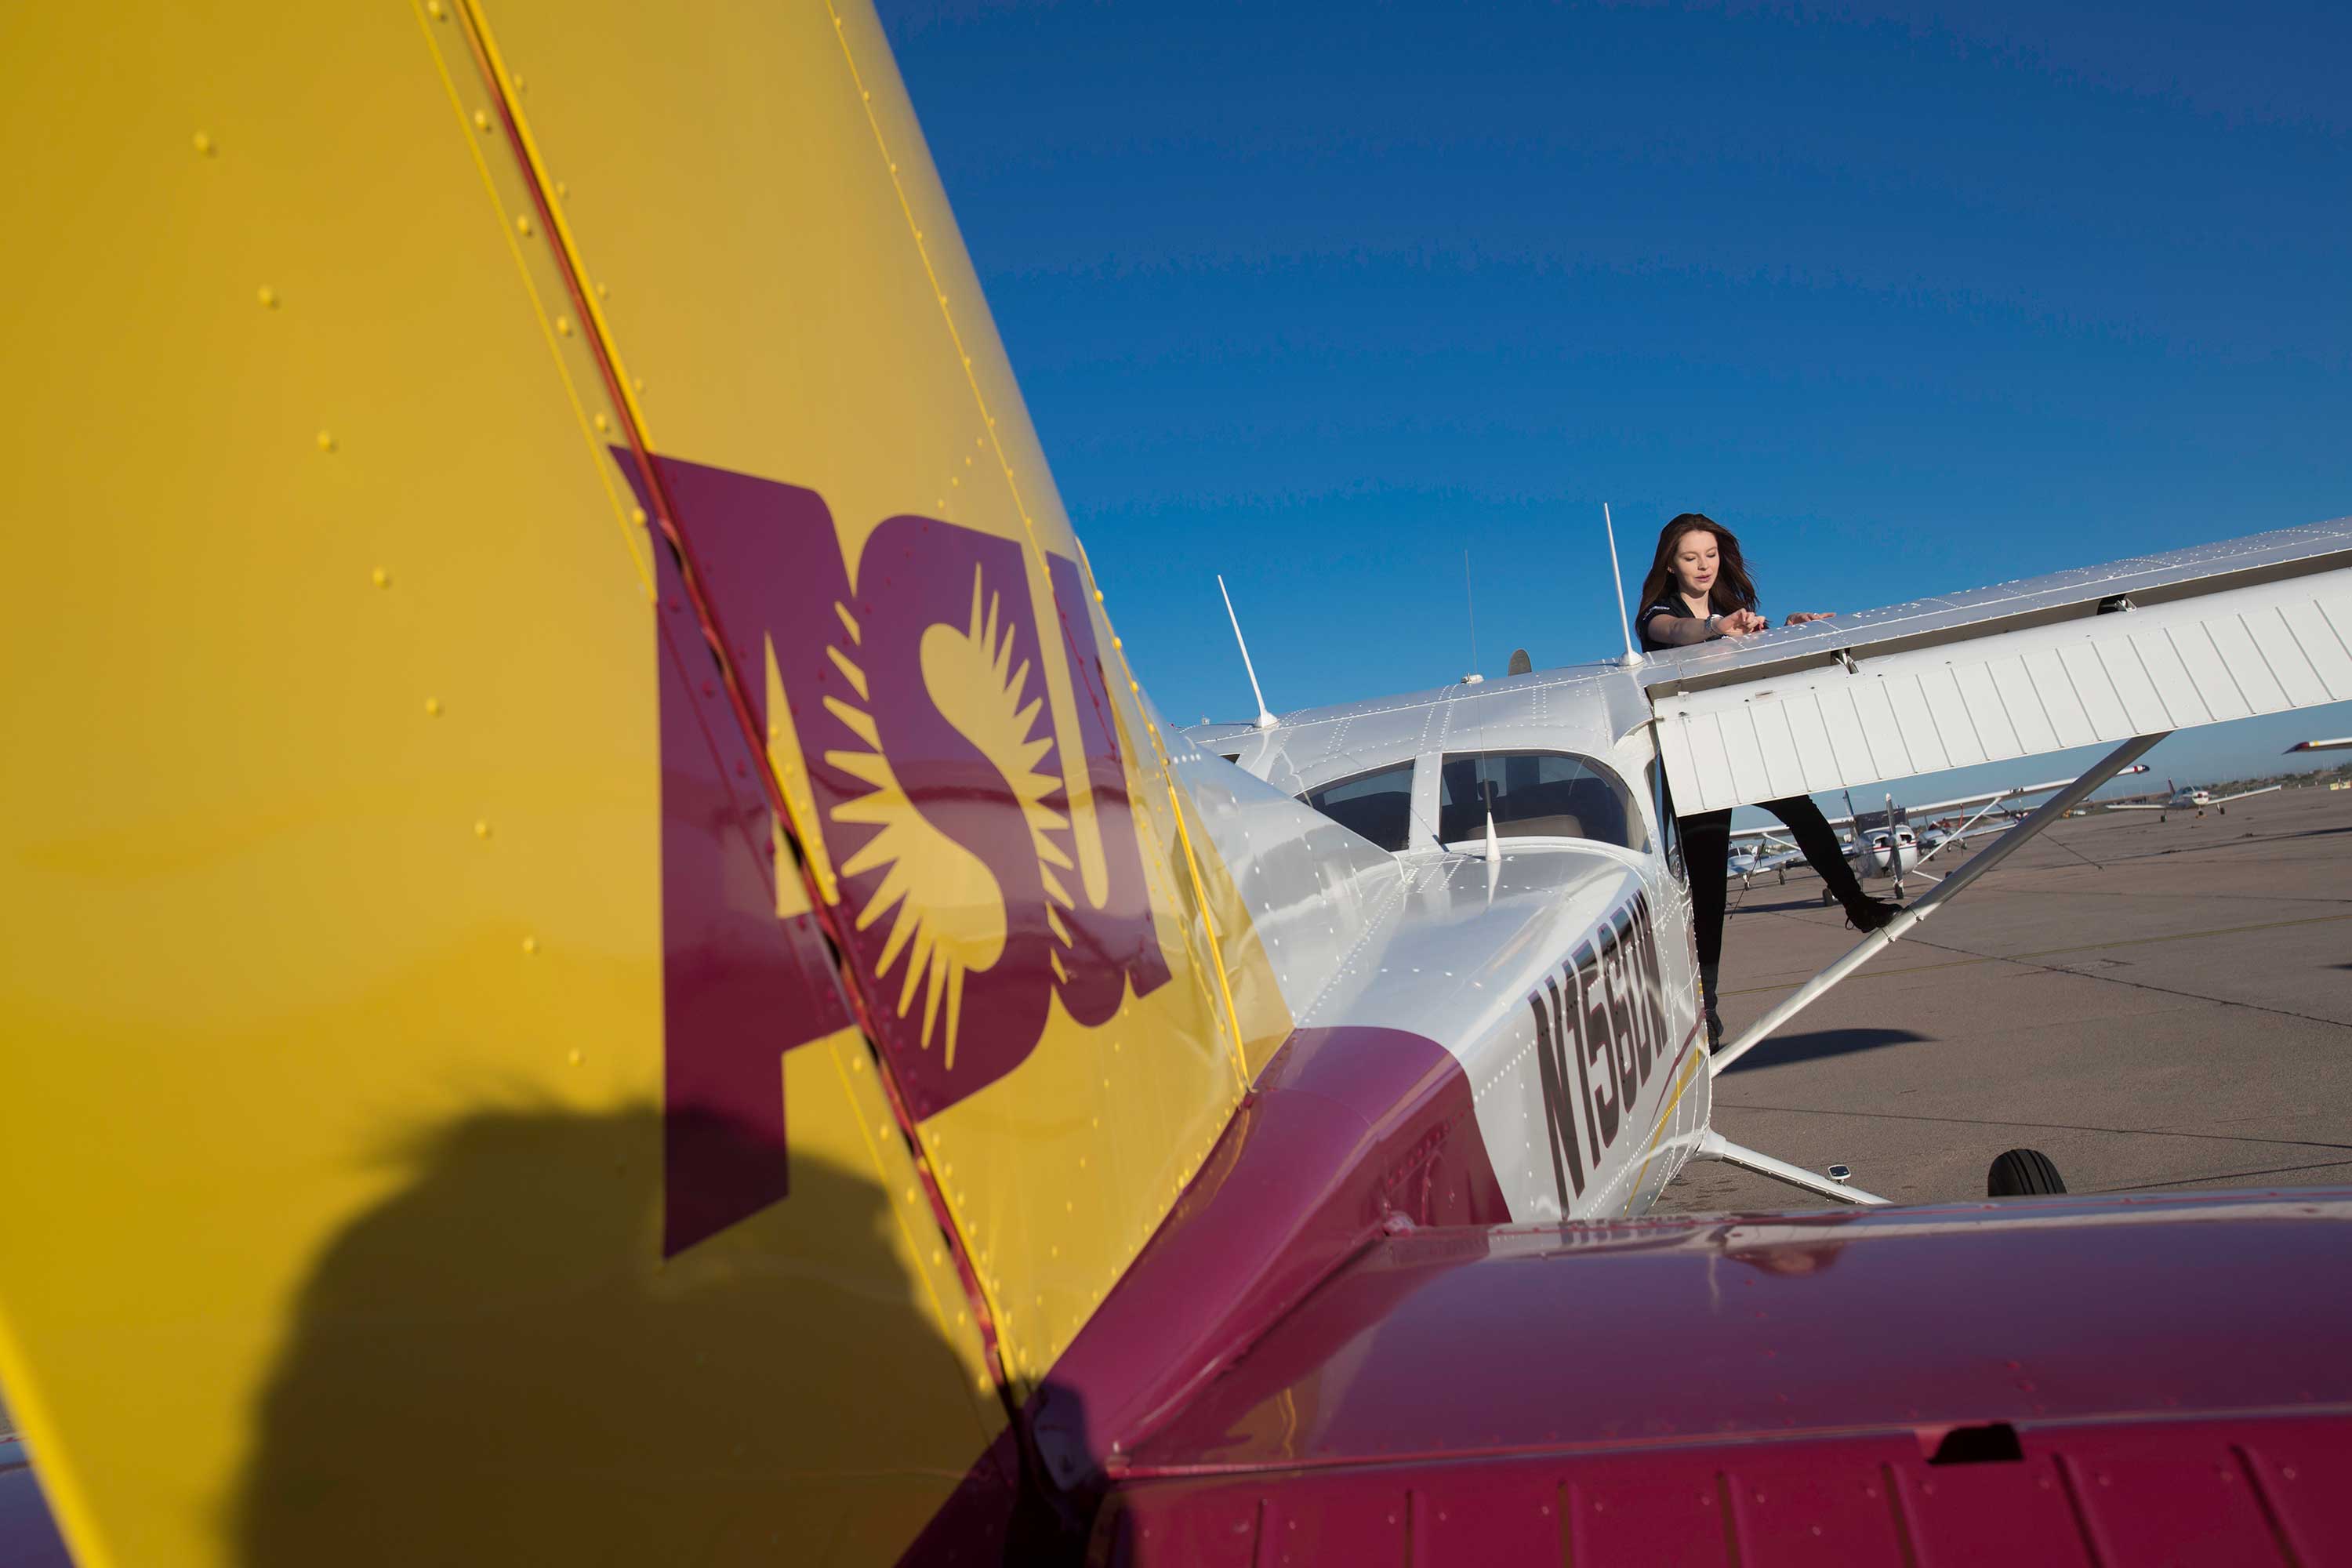 Student working on plane with ASU logo on it